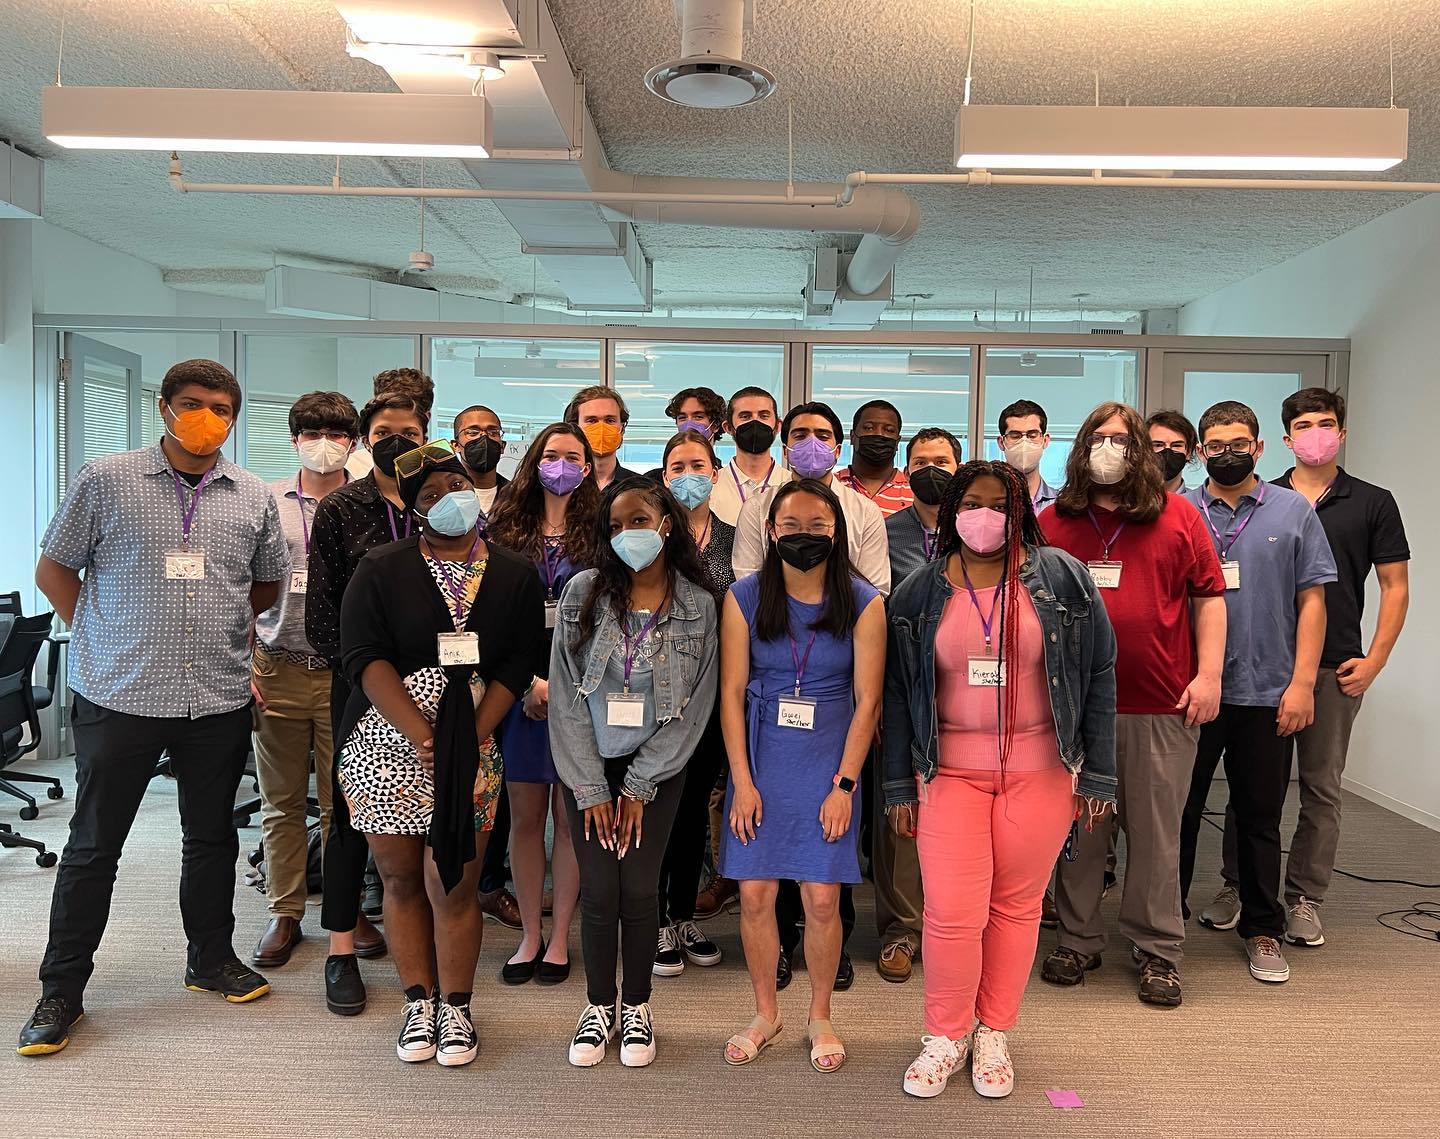 This is a group photo with all of our Summer 2022 interns! Everyone is wearing a face mask and standing close together in our well-lit office space.